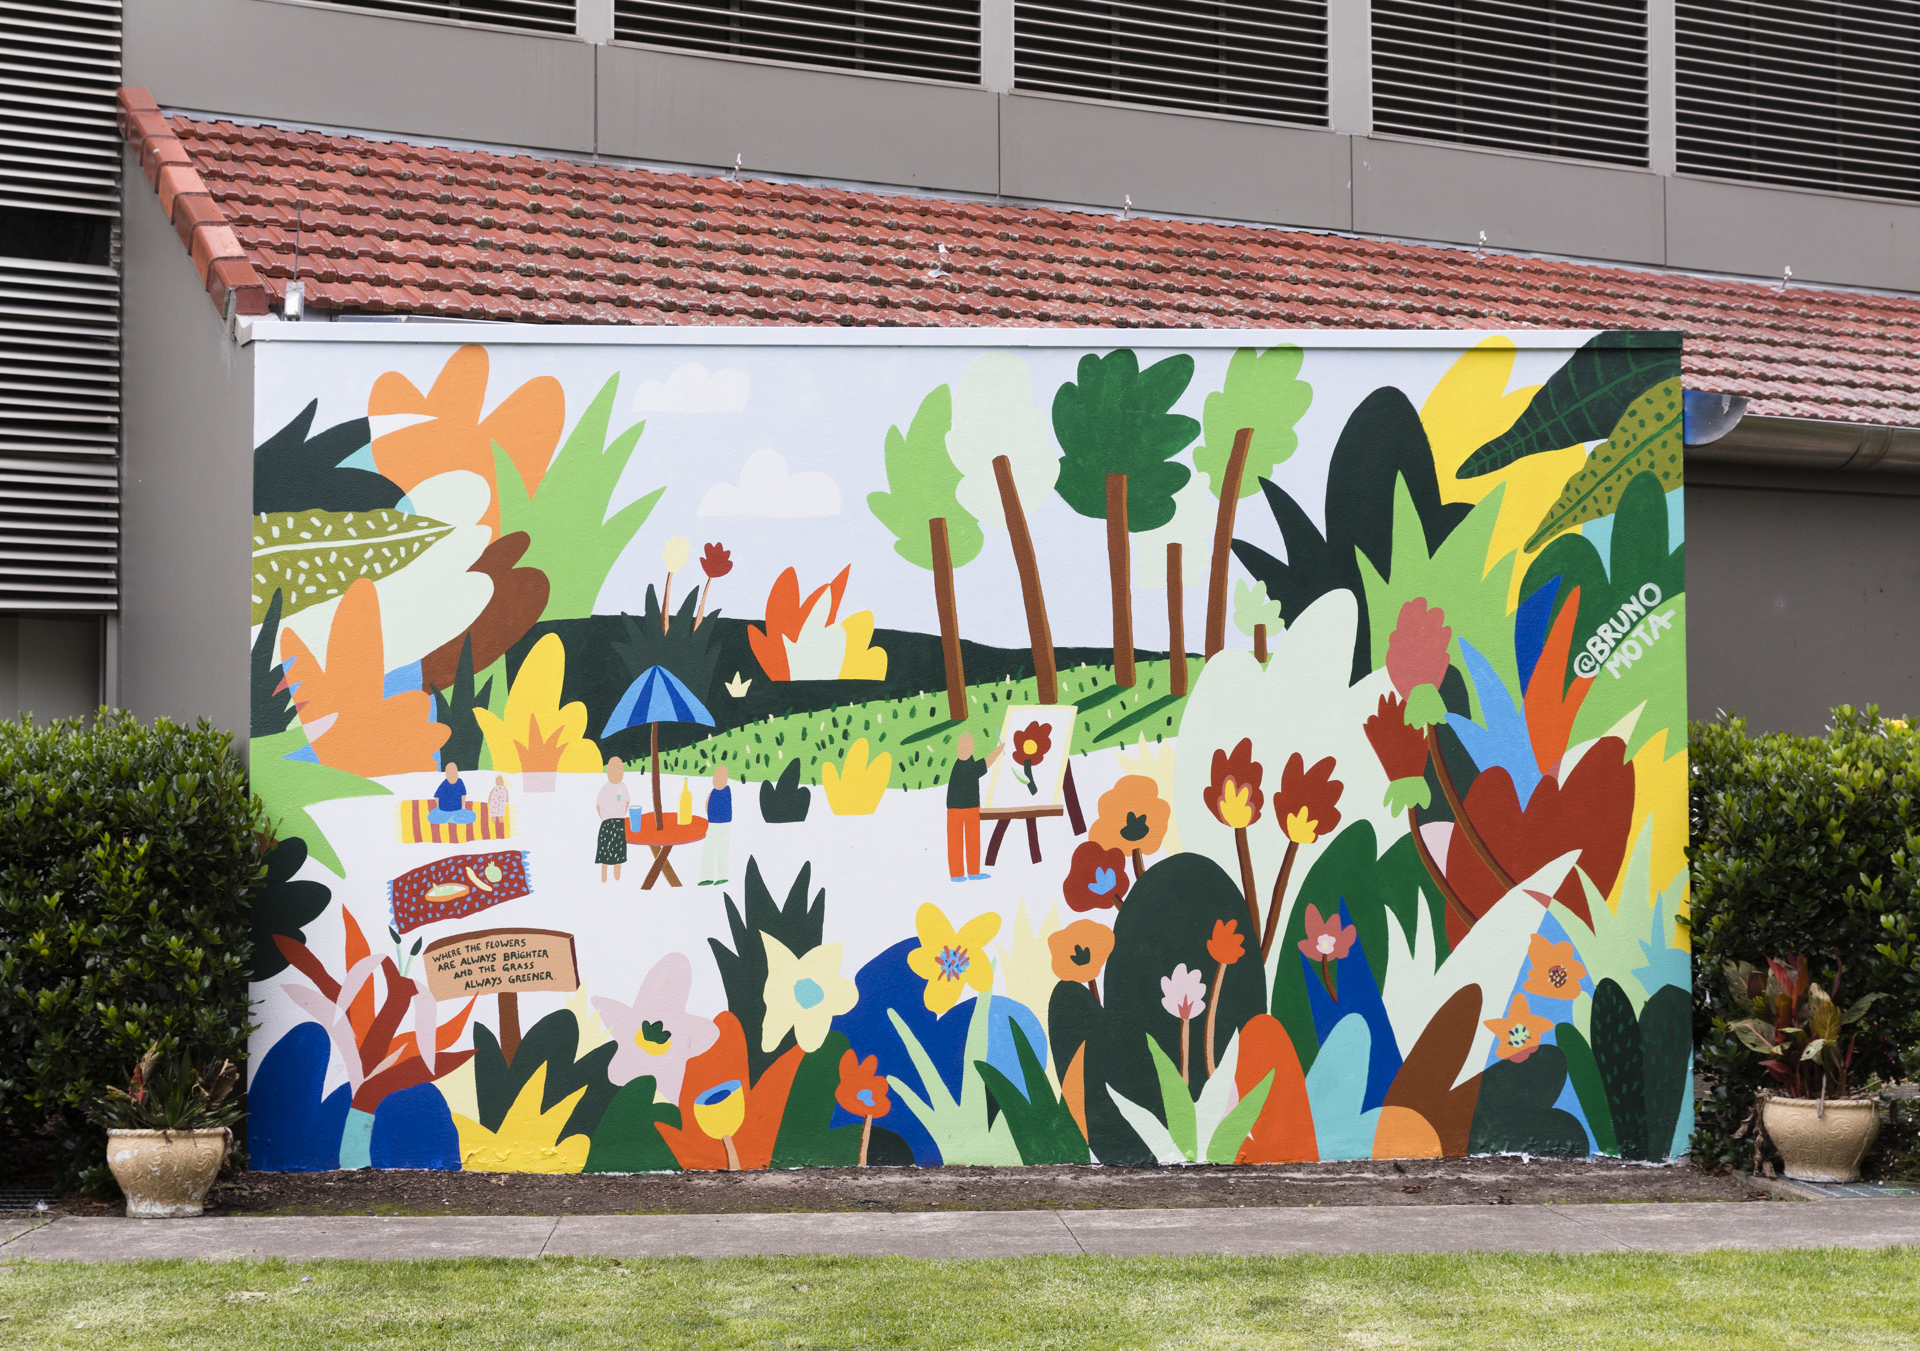 A large colourful outdoor mural inspired by Hazelhurst's outdoor spaces.